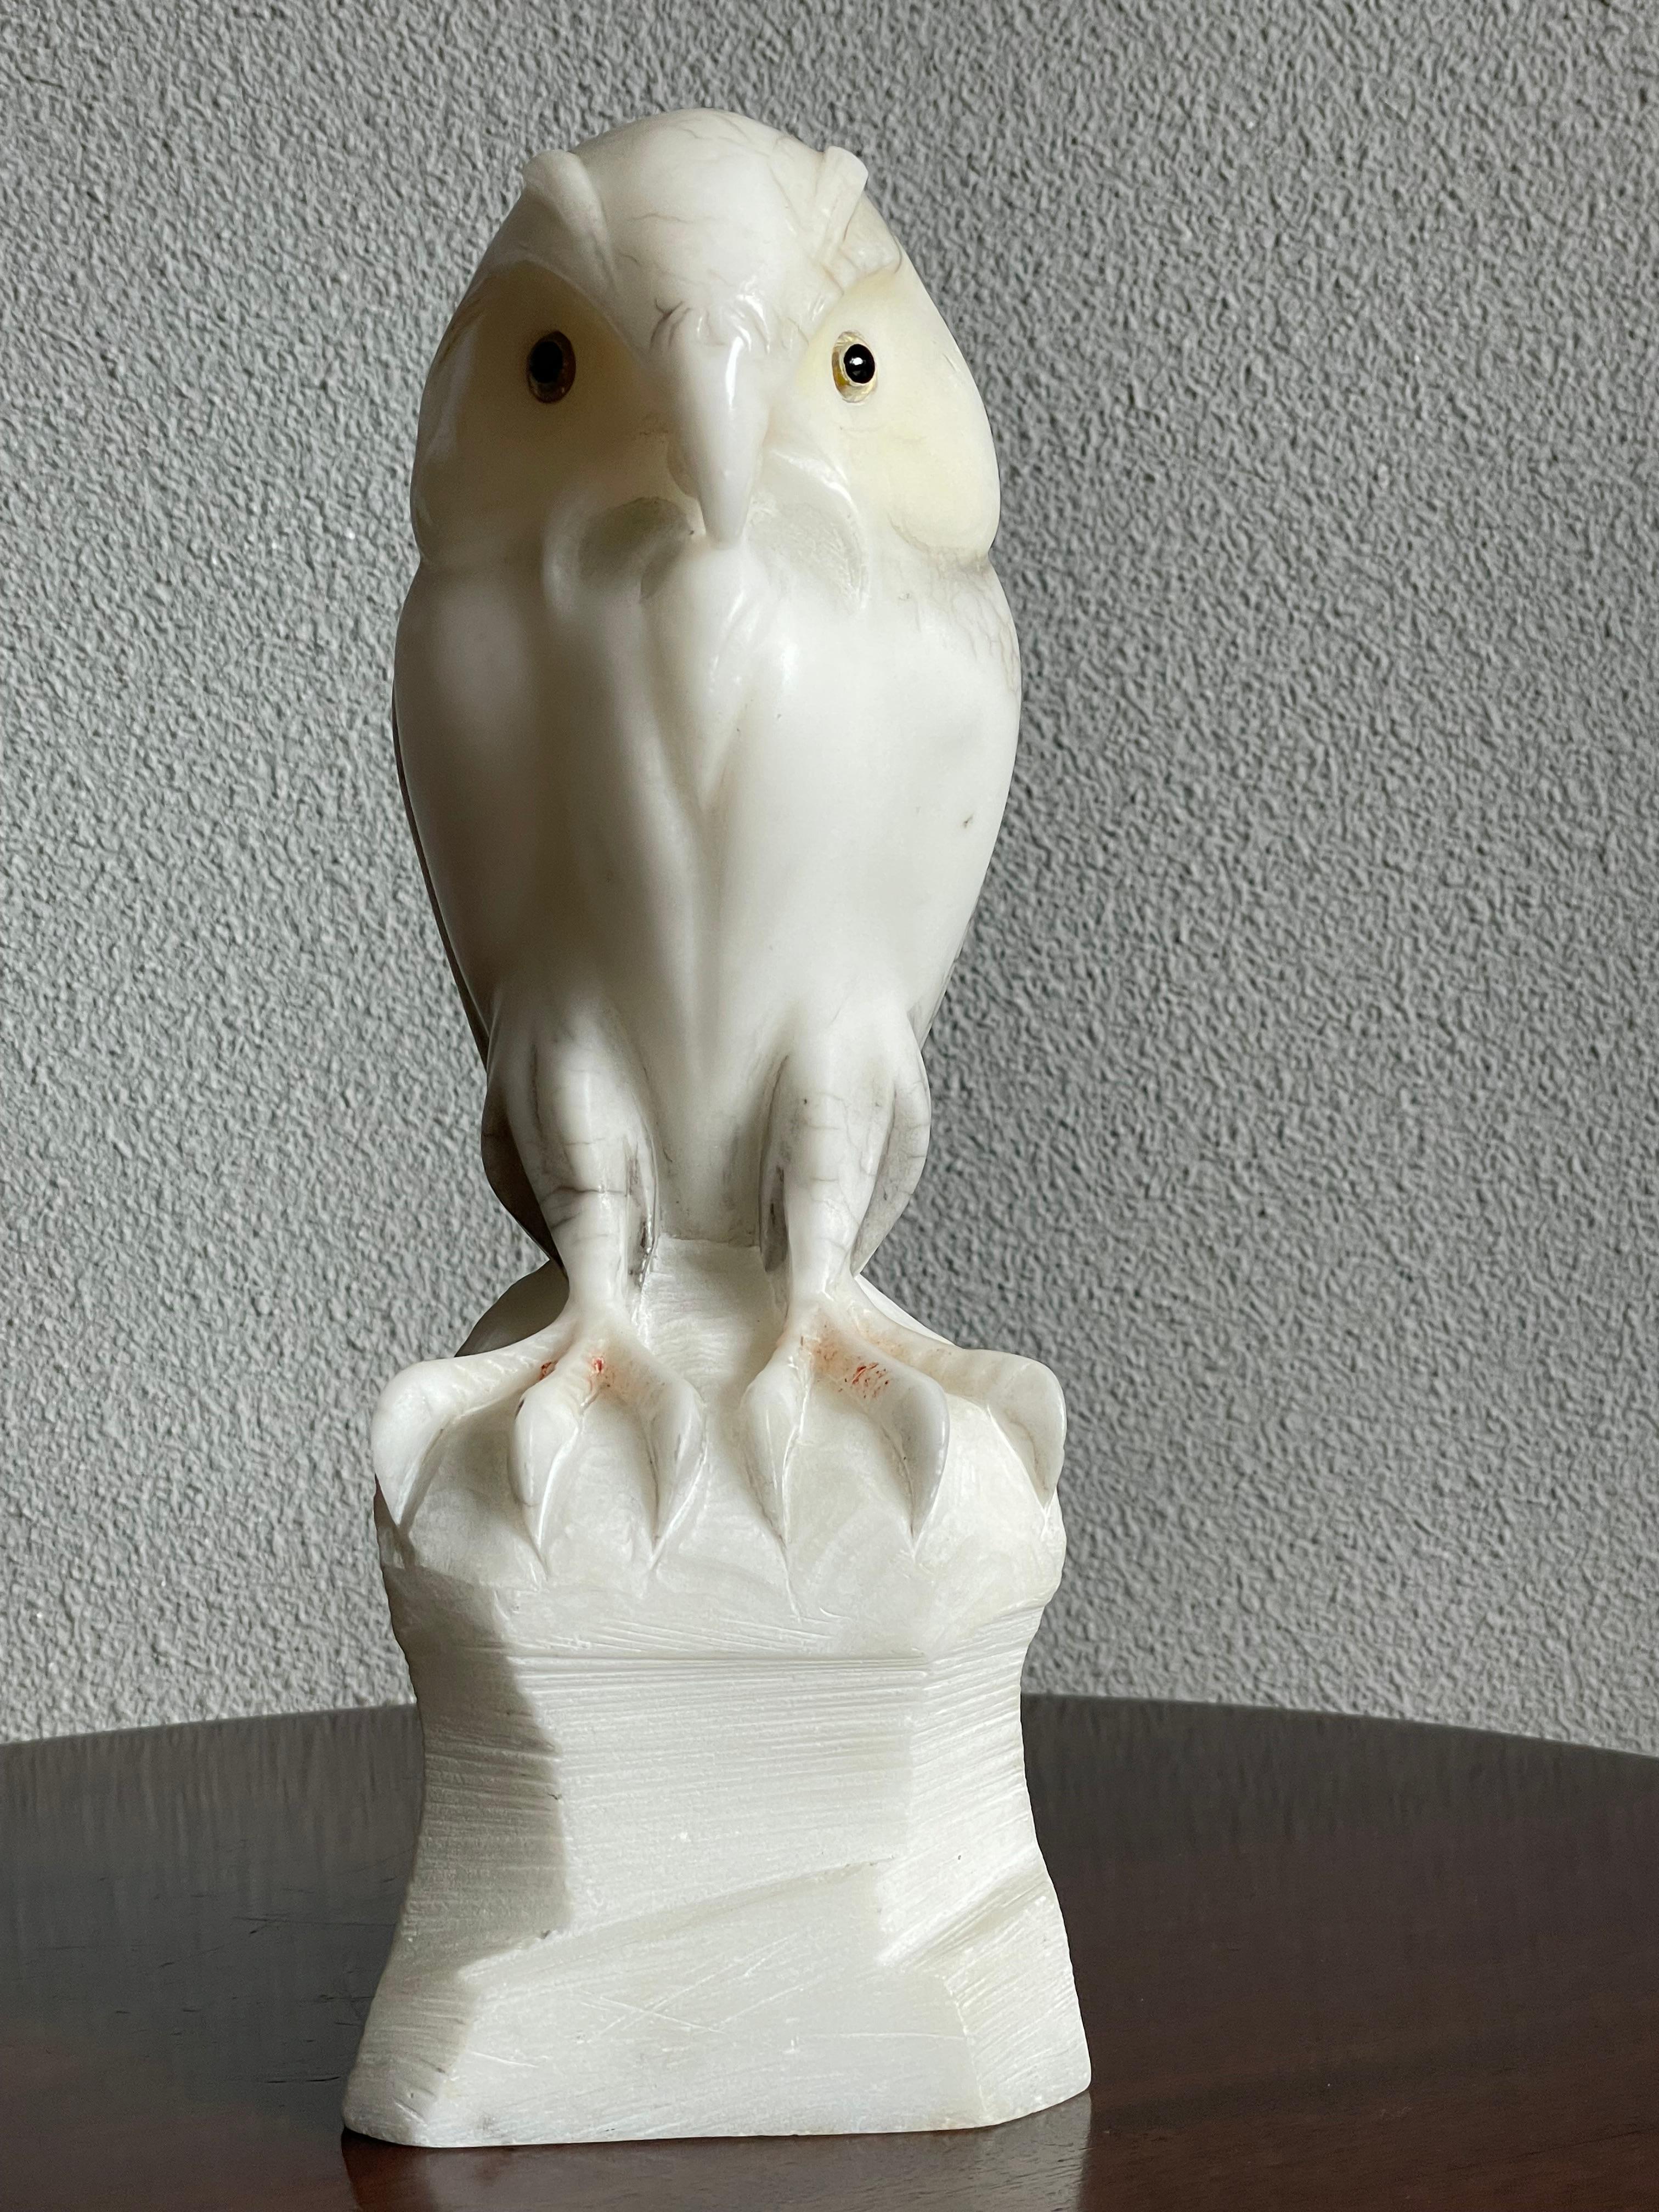 Mint condition and beautifully handcarved alabaster owl sculpture.

This incredibly well carved barn owl from the midcentury era clearly was well loved by it's previous owners, because after all those years it still is in magnificent condition.